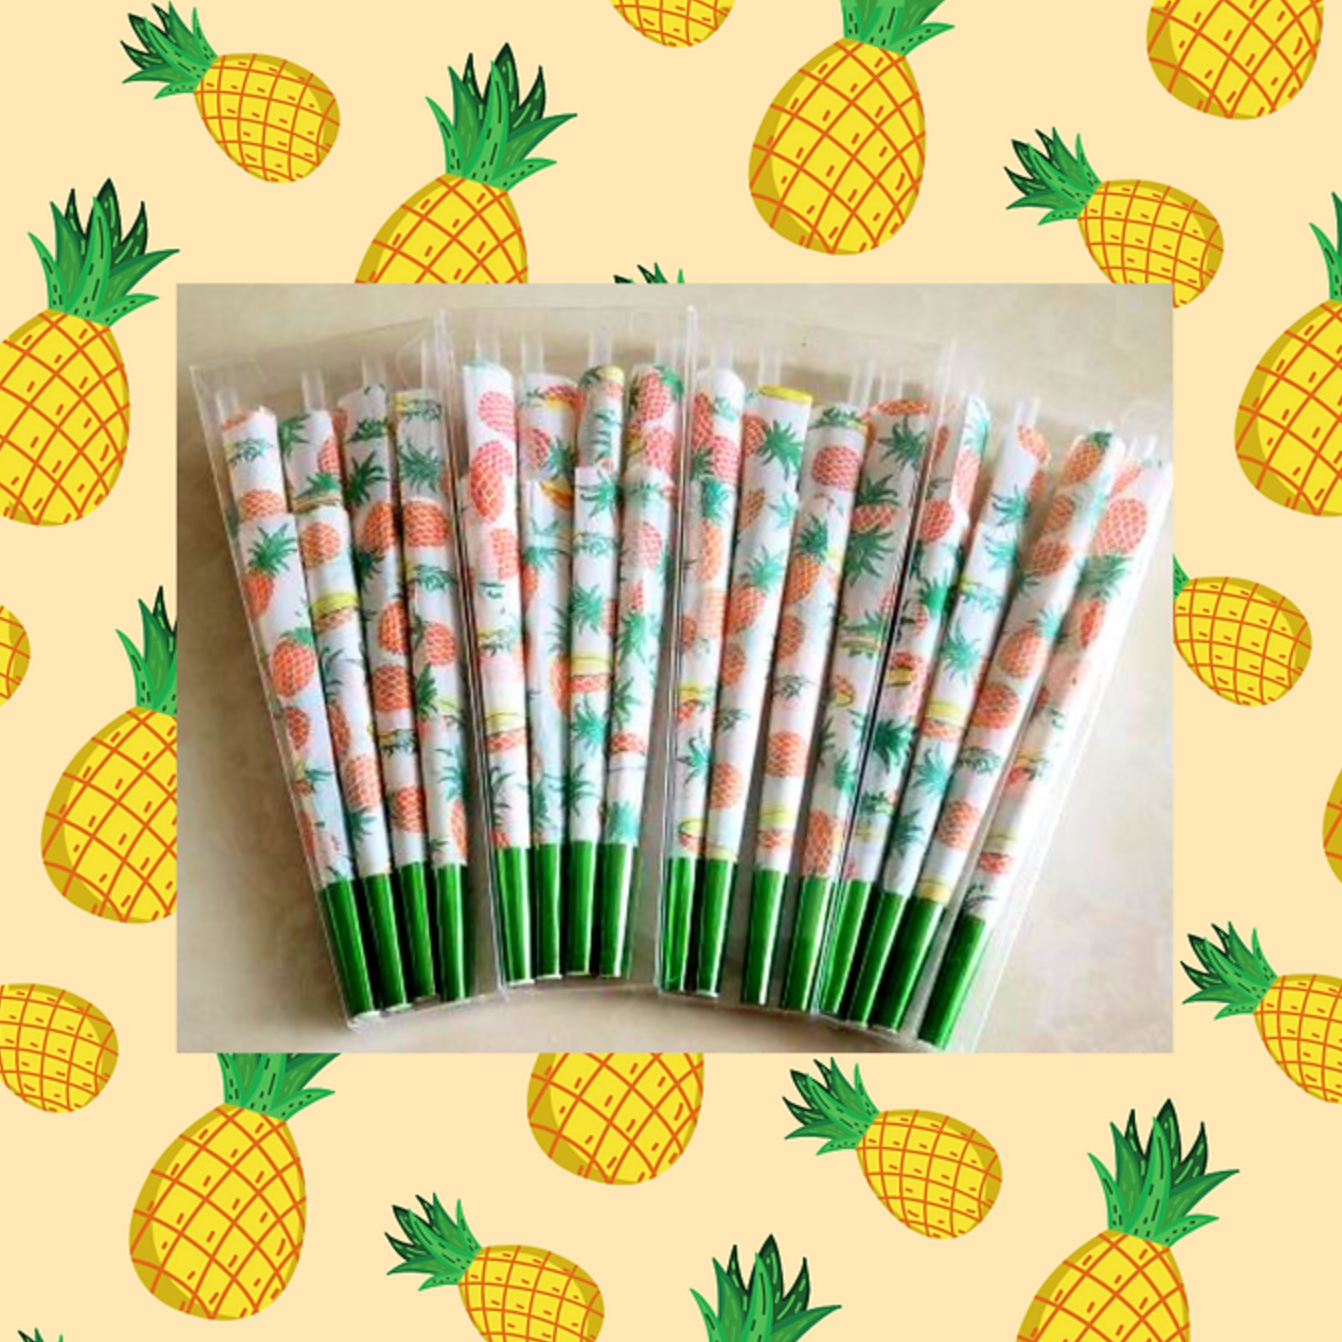 Pineapple flavored cones